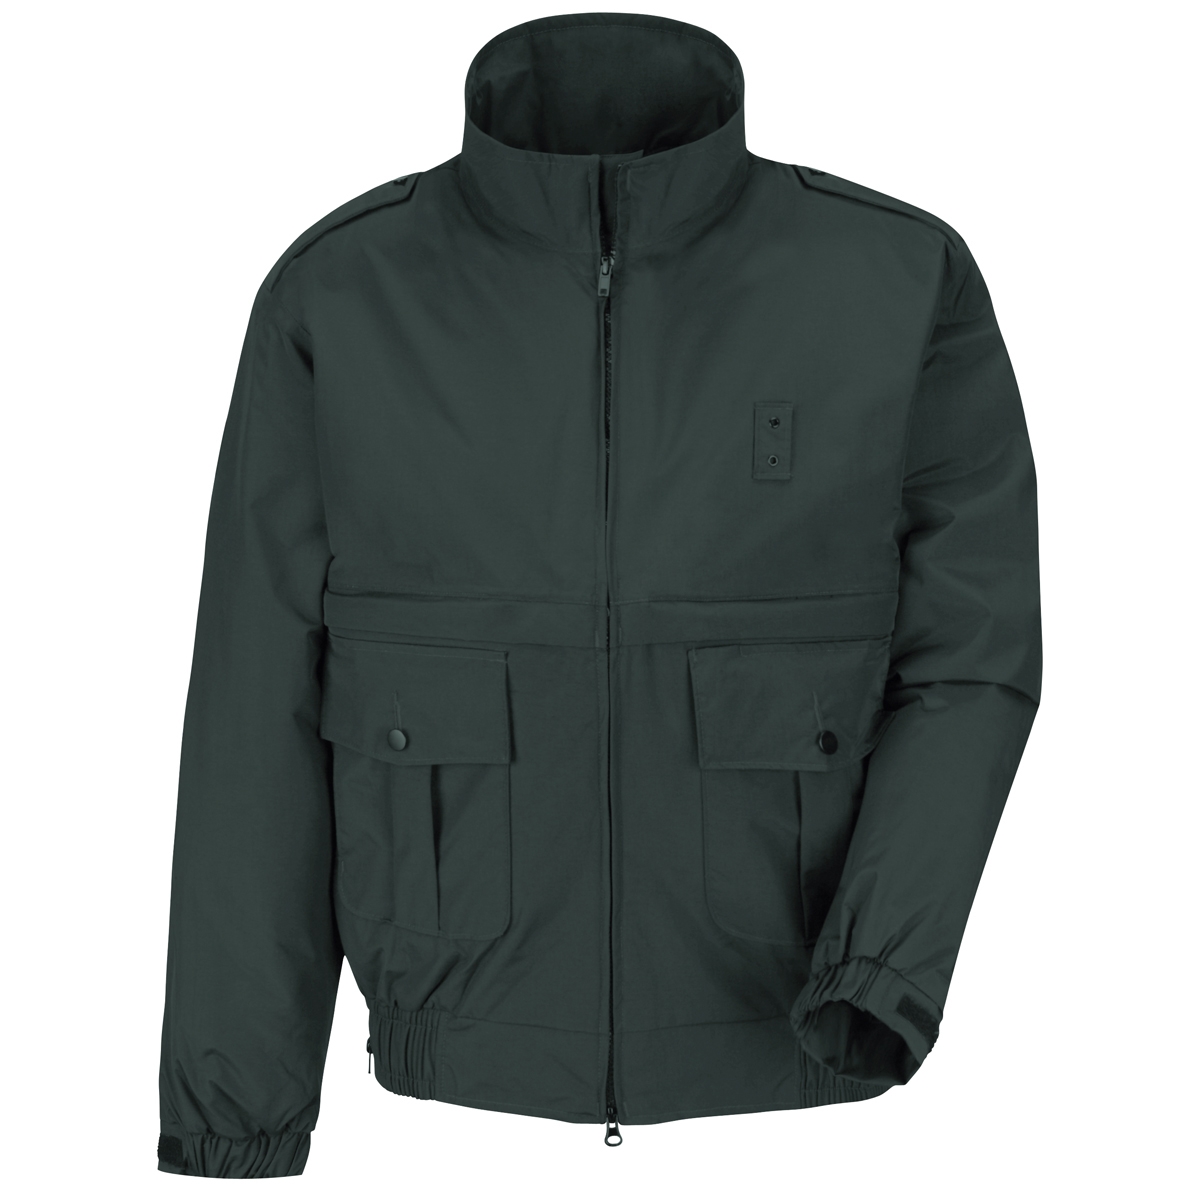 Horace Small HS3354 New Generation 3 Jacket - Spruce Green - Large